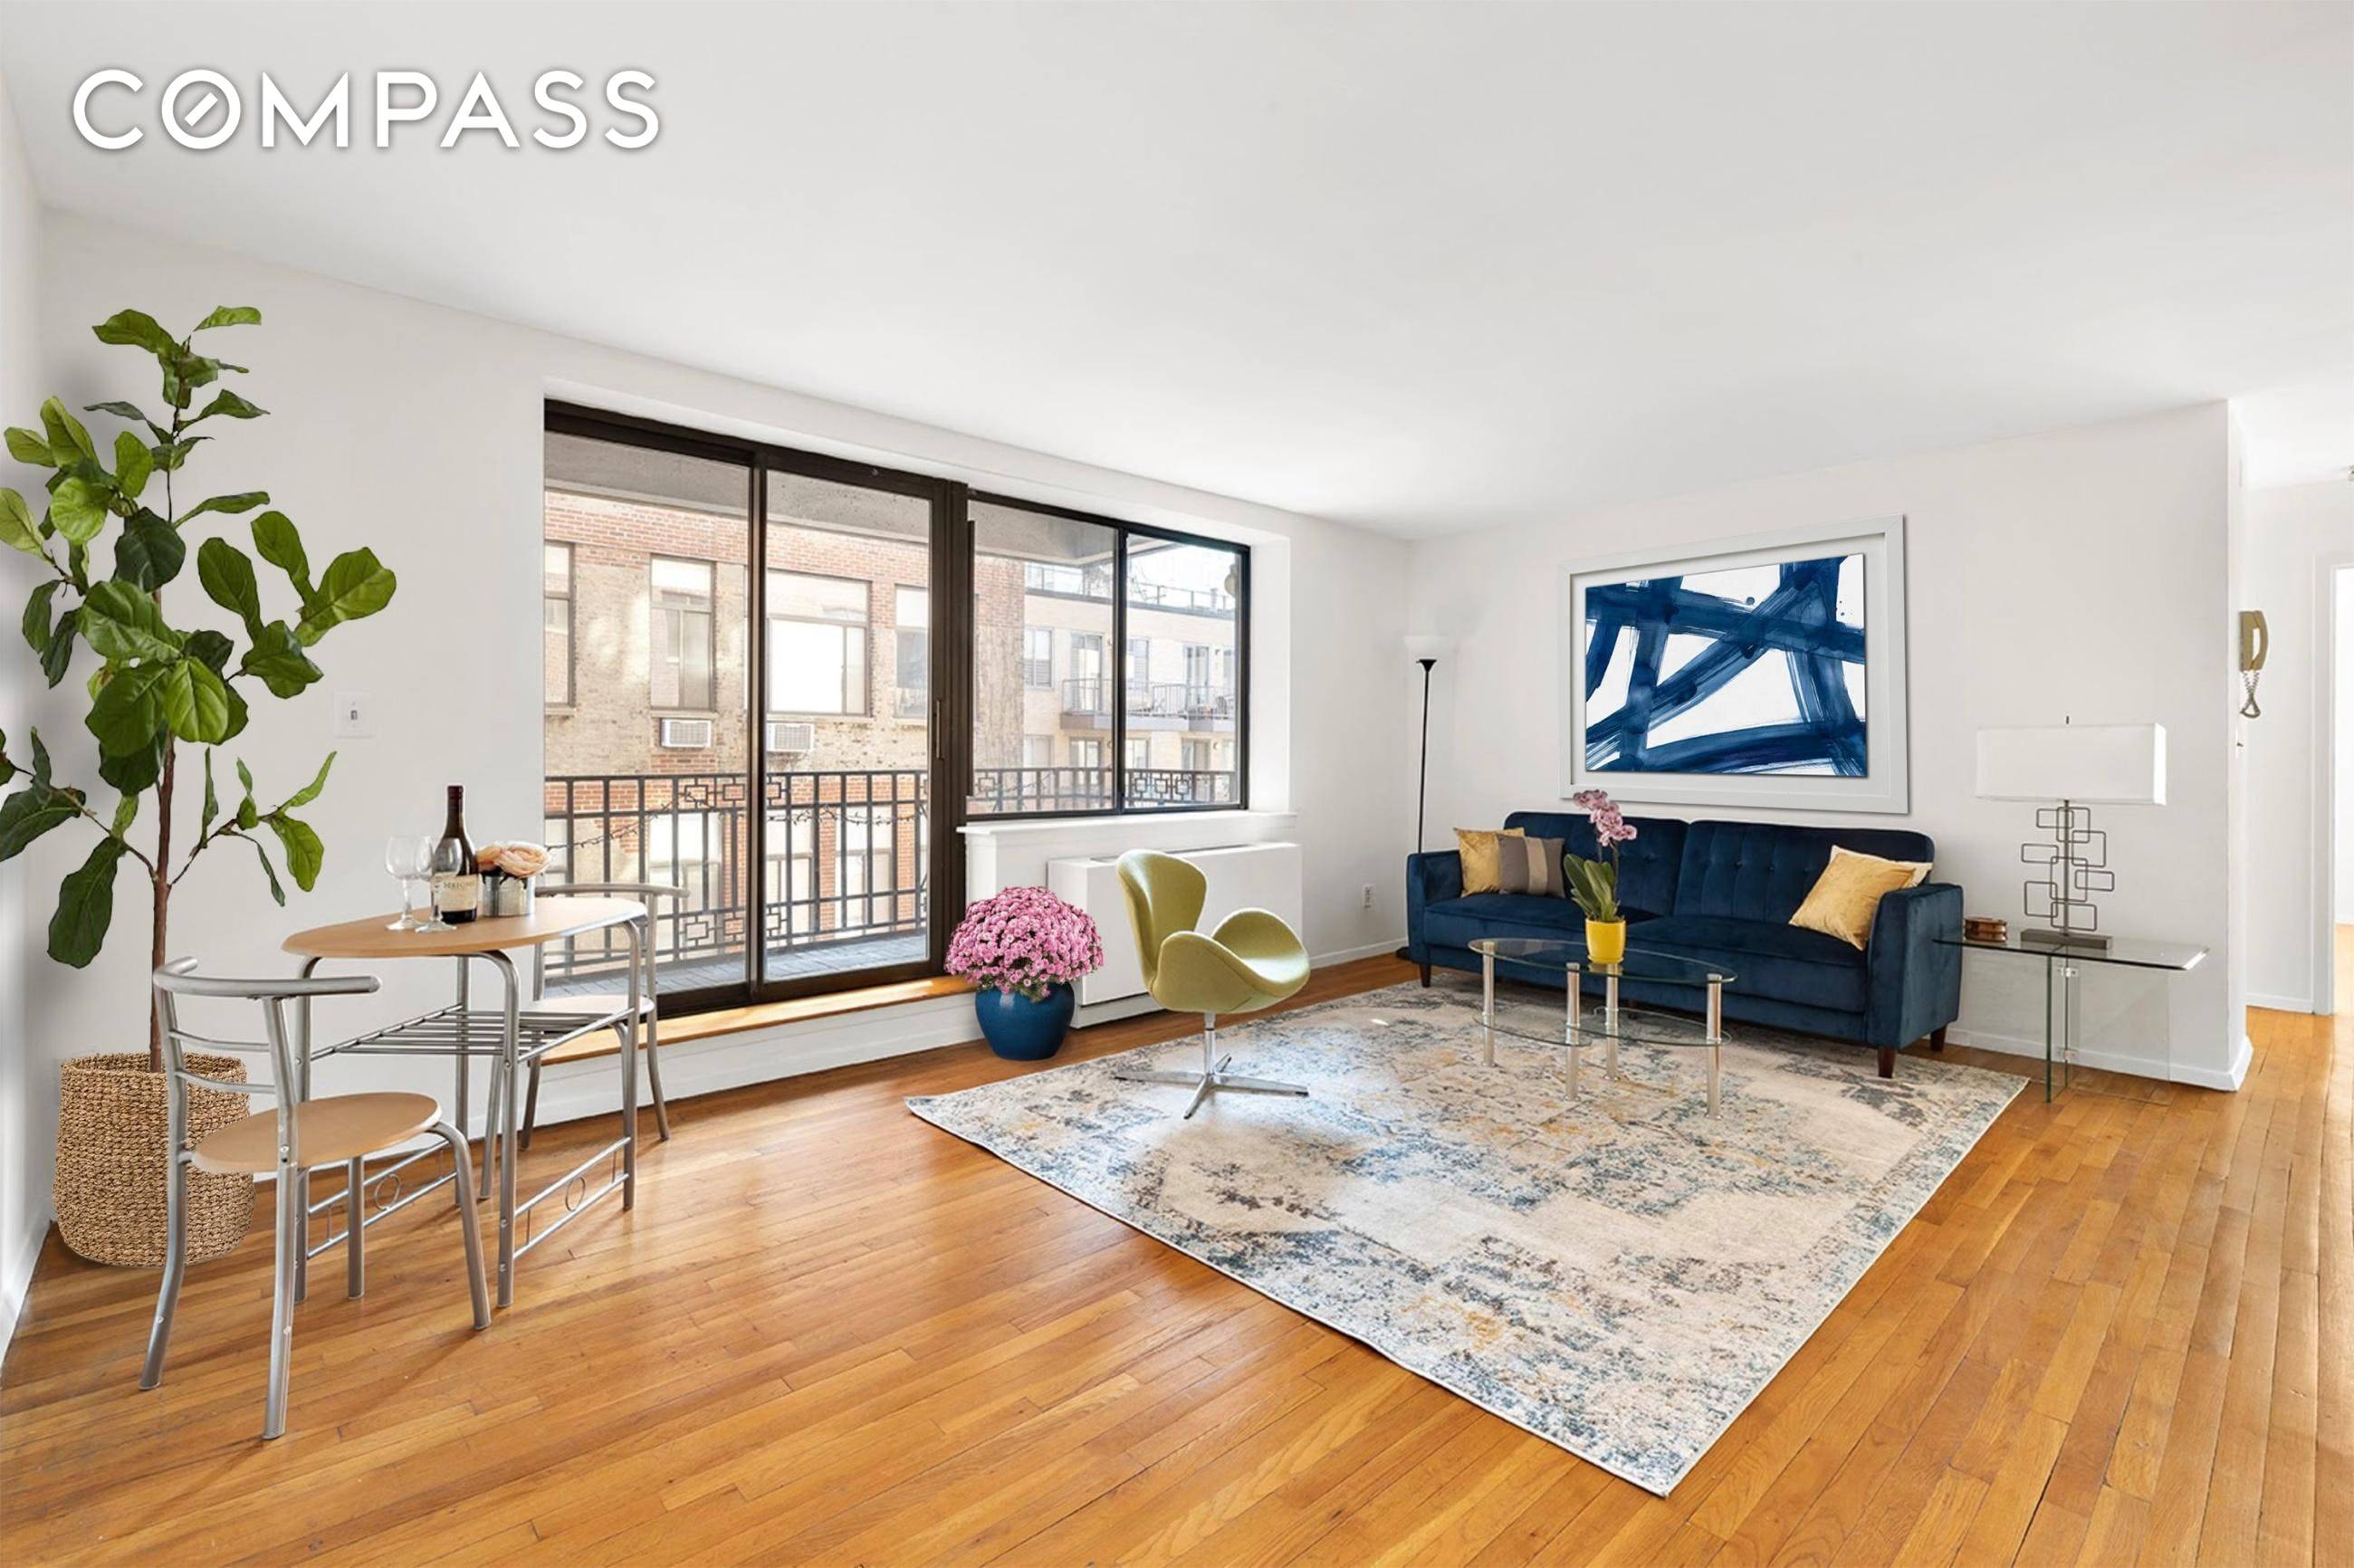 THE PERFECT ONE BEDROOM. Enjoy the peaceful West Village lifestyle in this one bedroom condo with spacious layout, large living room, oversized balcony.